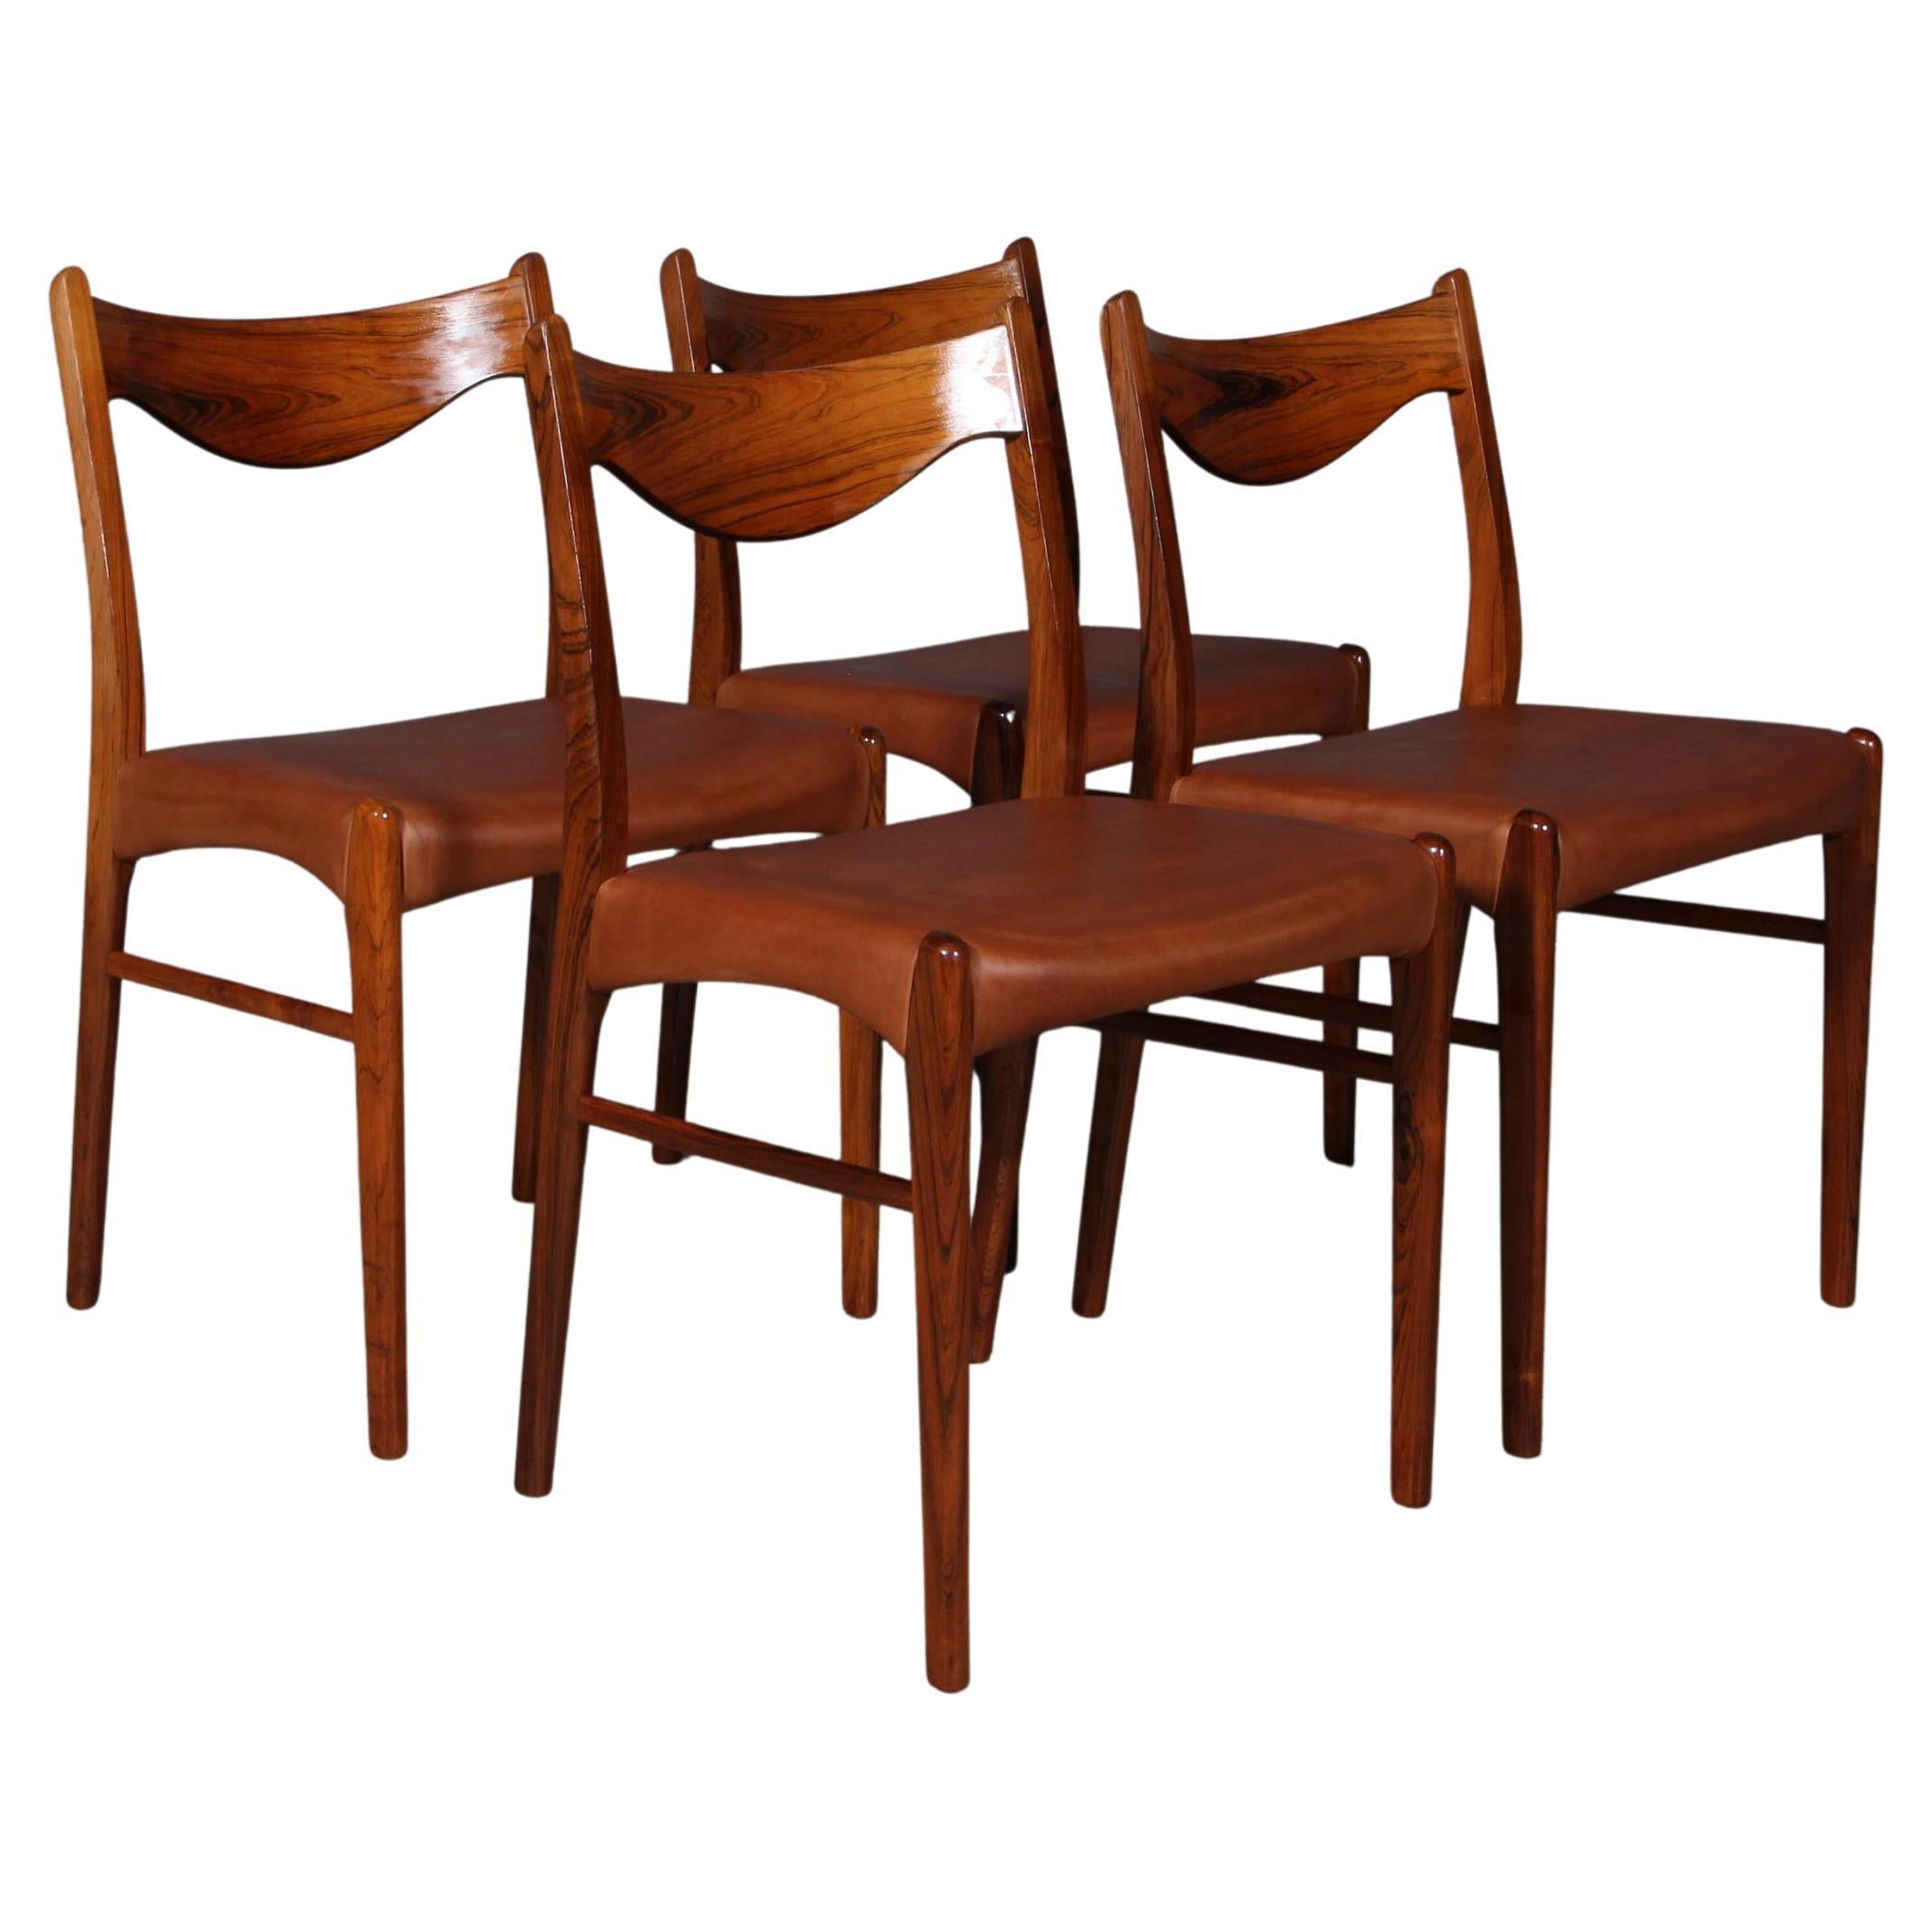 Set of 4 Arne Wahl Dining Chairs